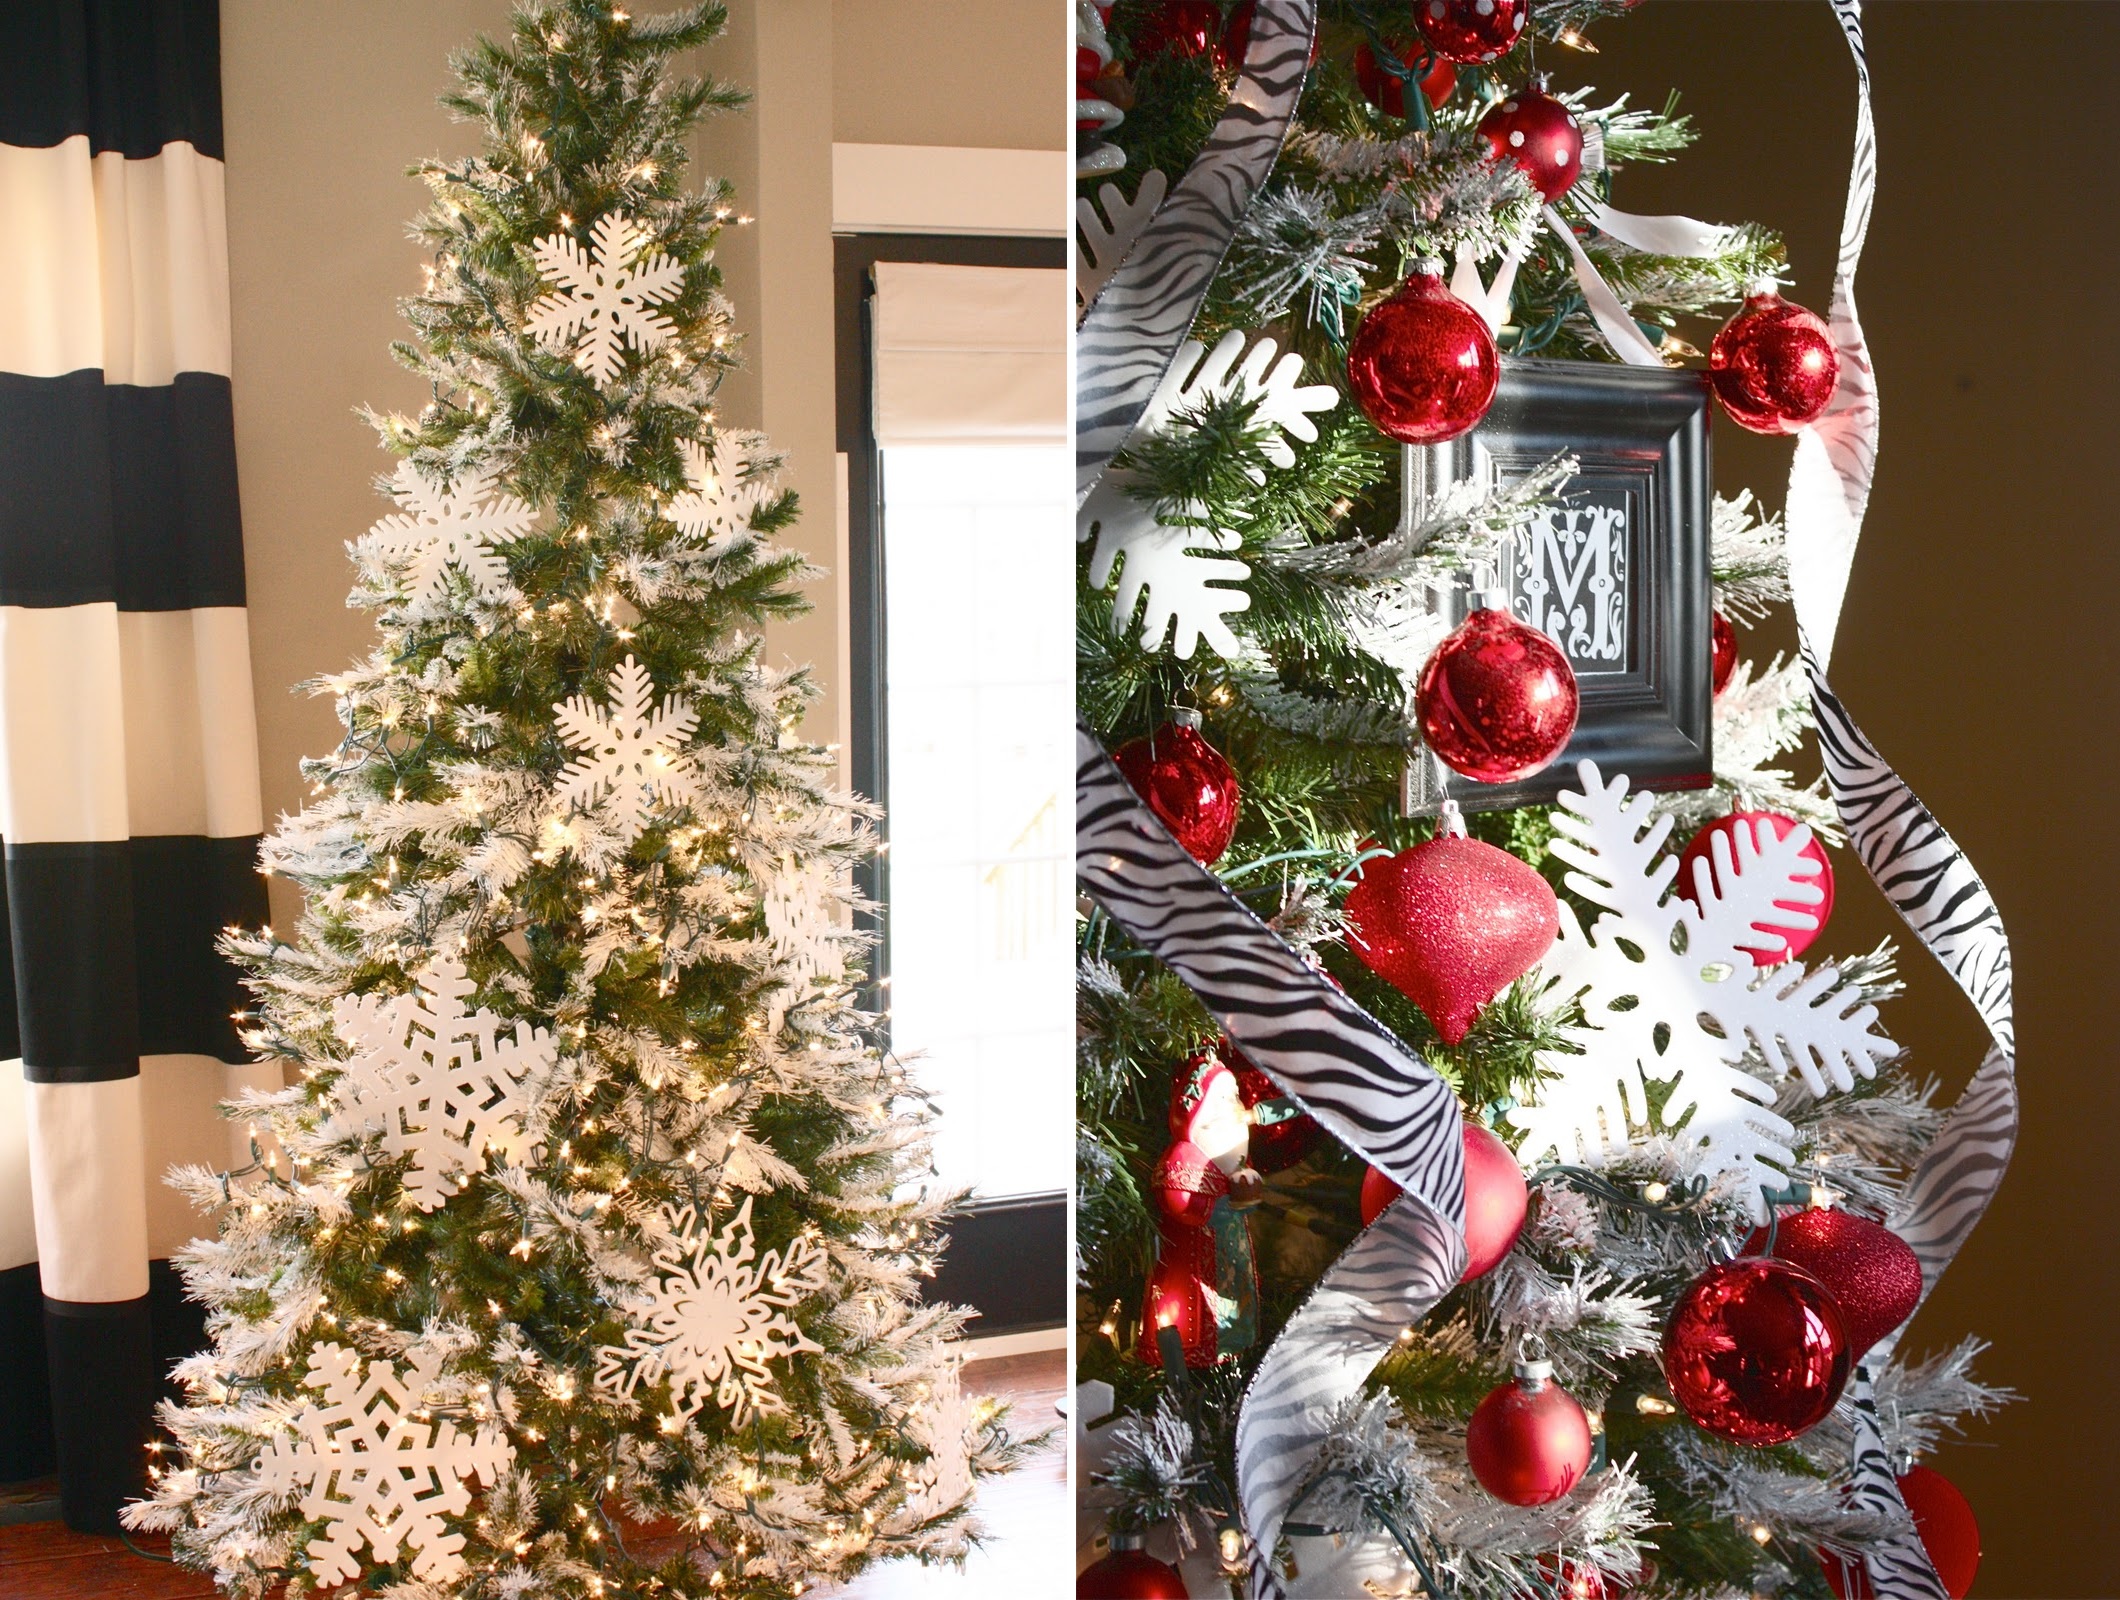 Starting from white to red - Christmas tree